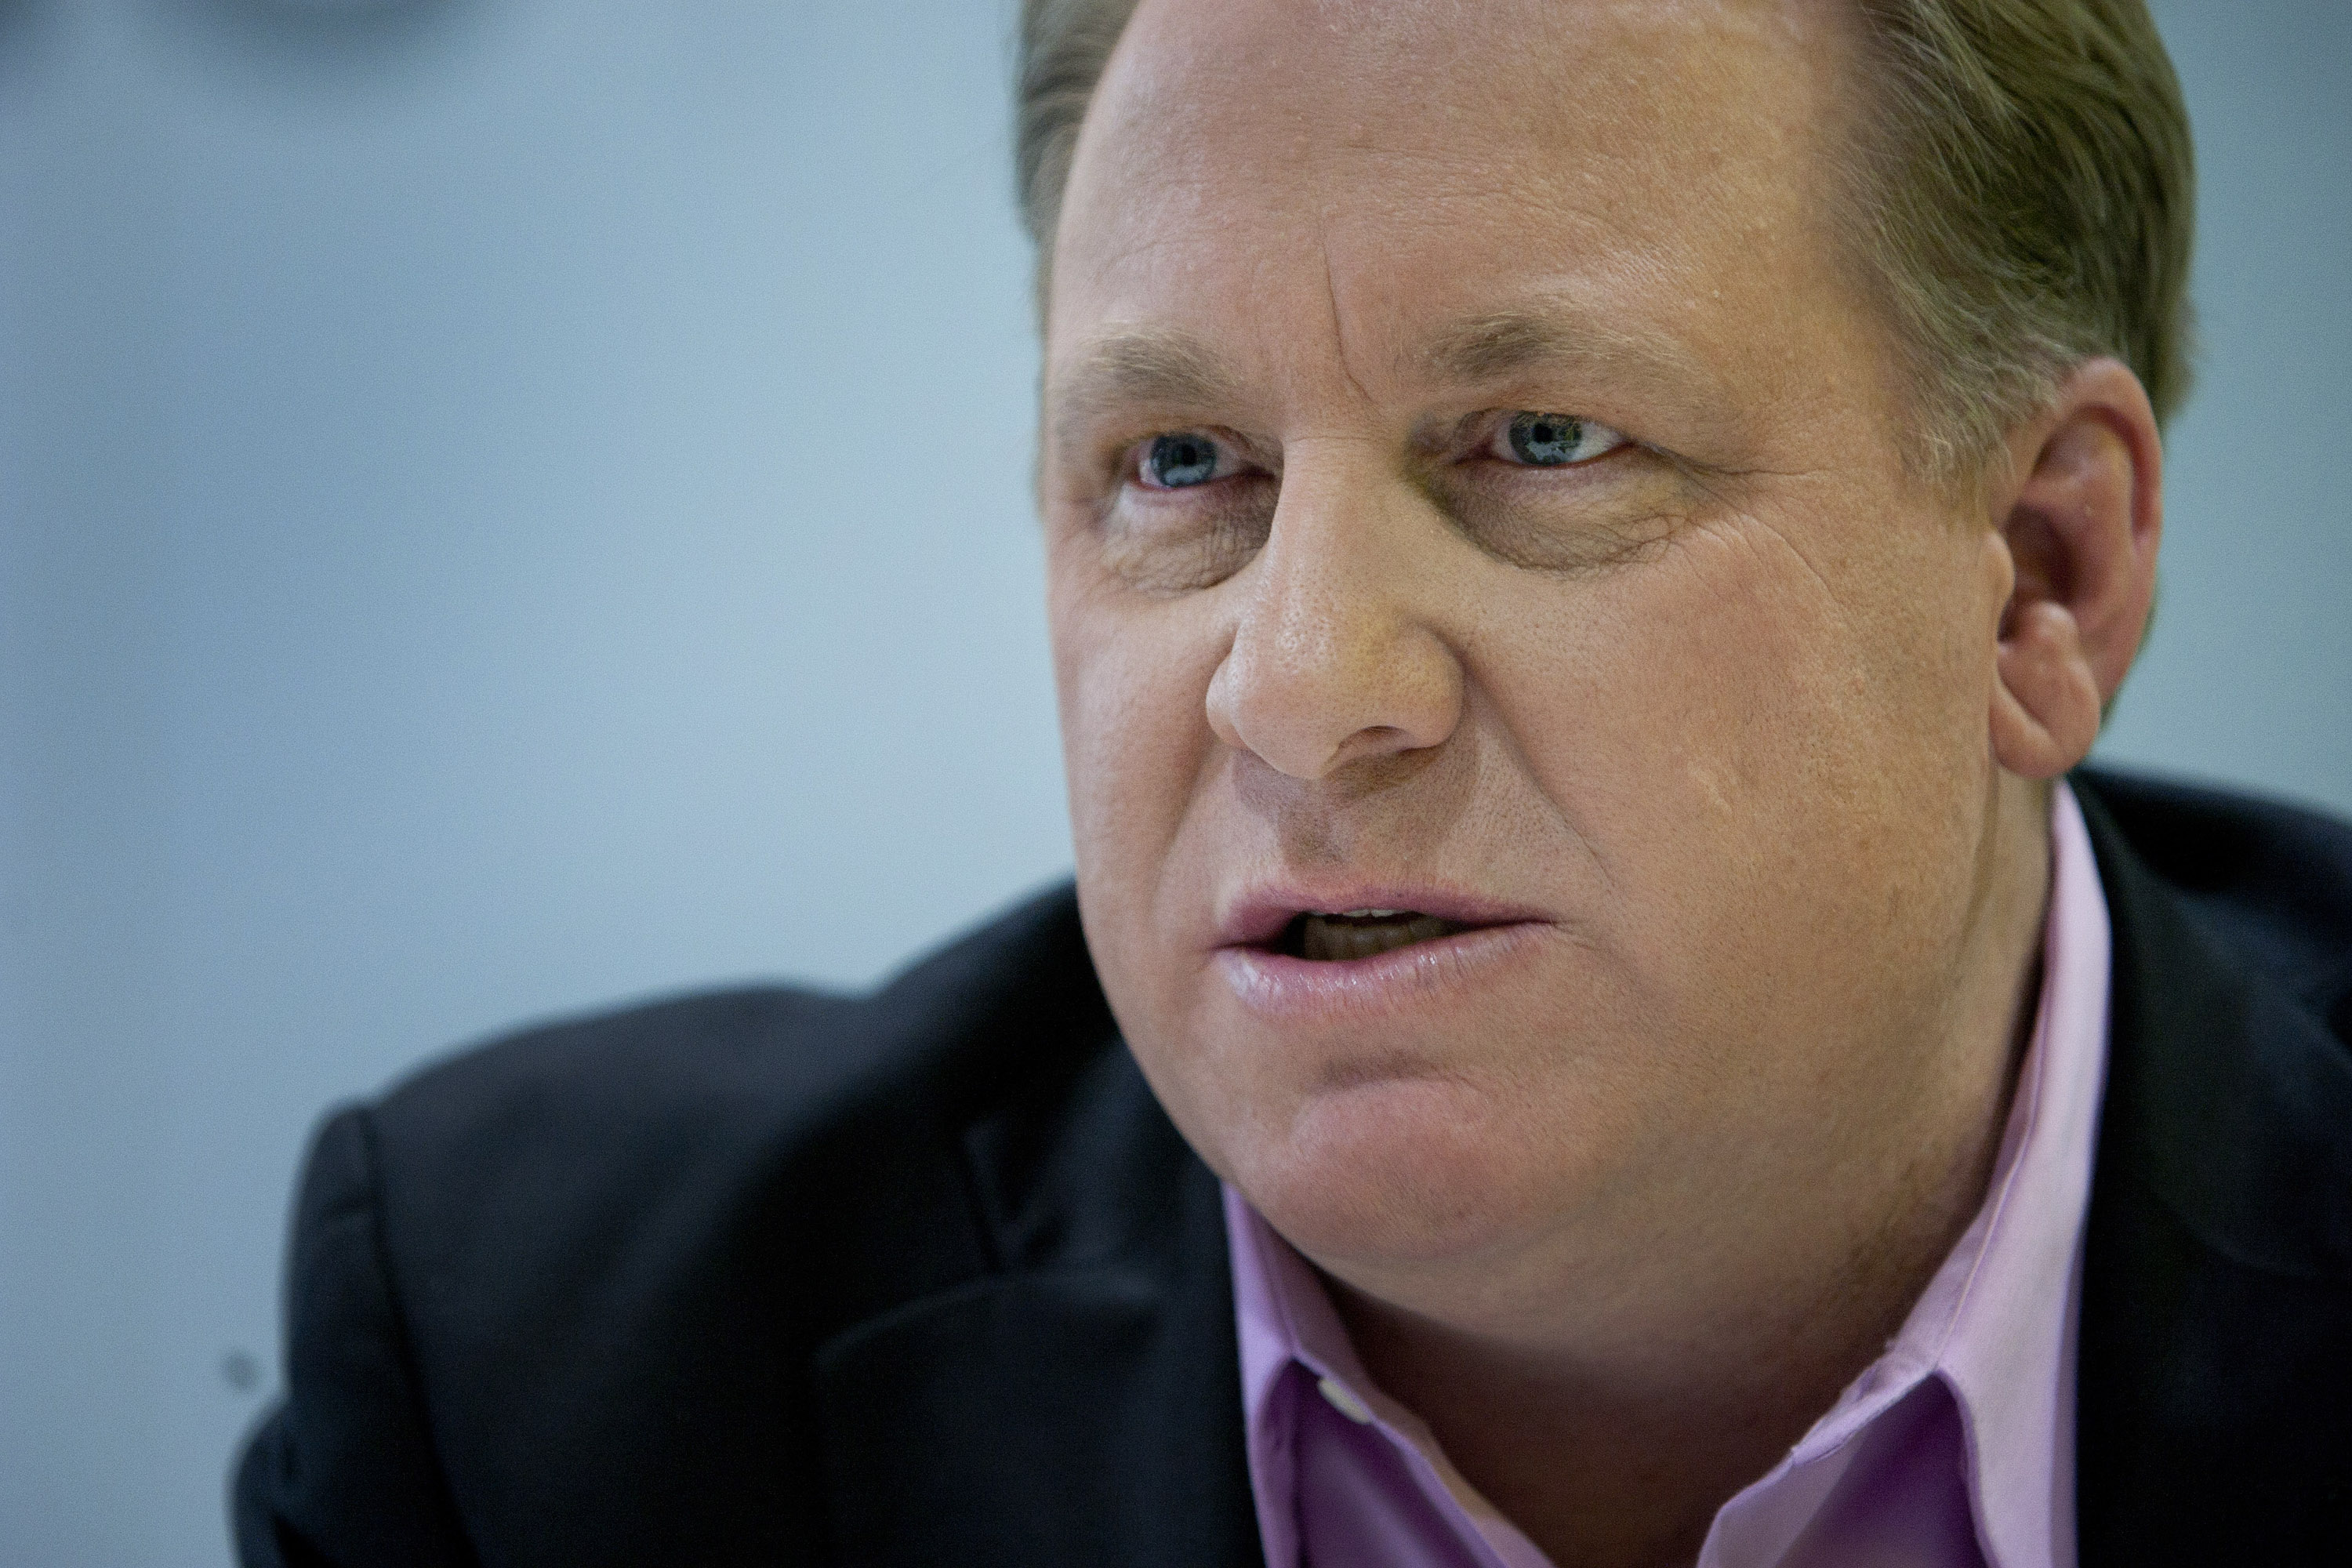 Curt Schilling, speaks during an interview in New York, U.S., on  Feb. 13, 2012. (Scott Eells—Bloomberg/Getty Images)